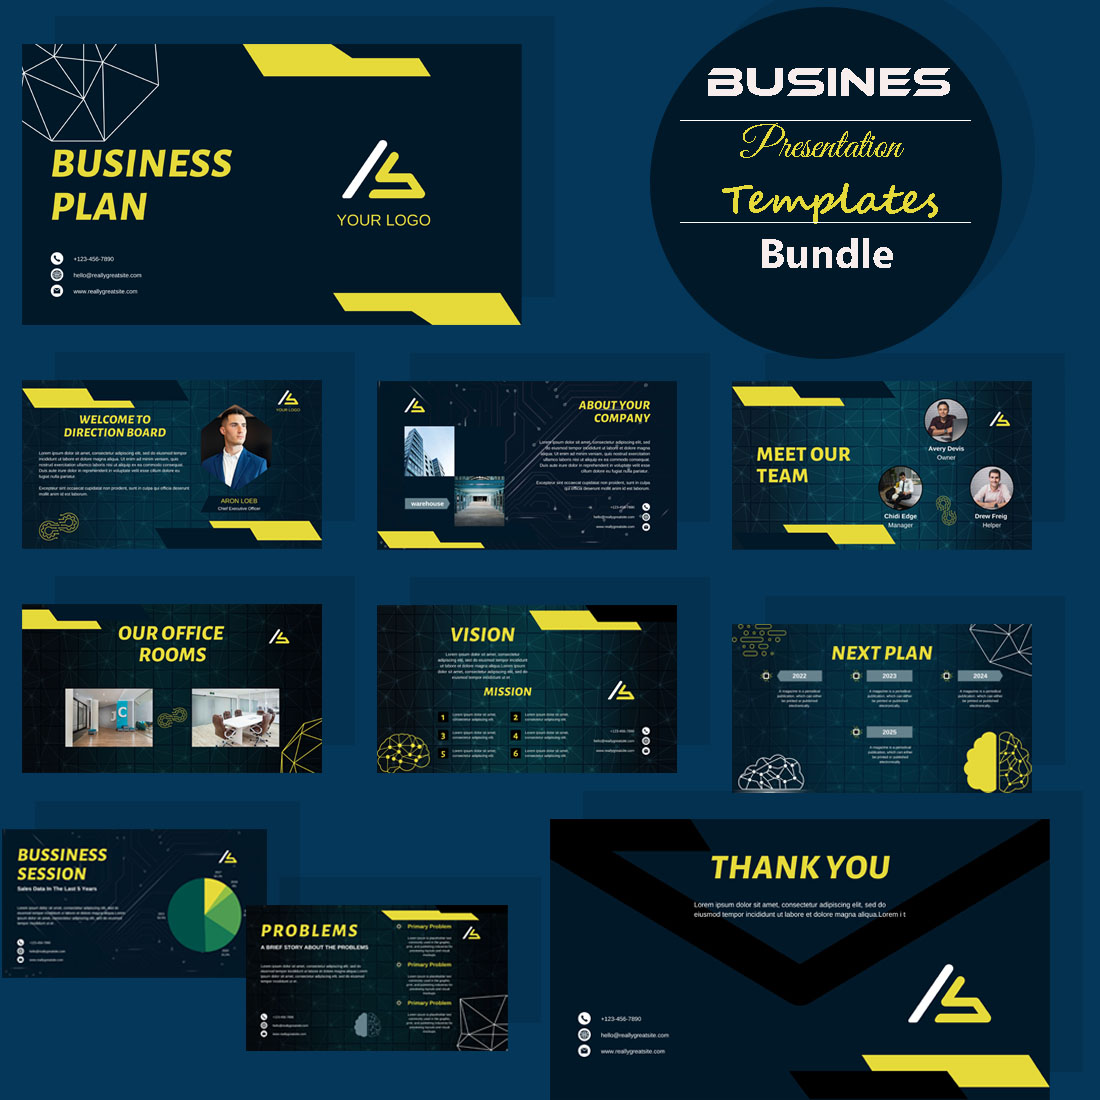 Business Presentation Template created by hridoy2646.